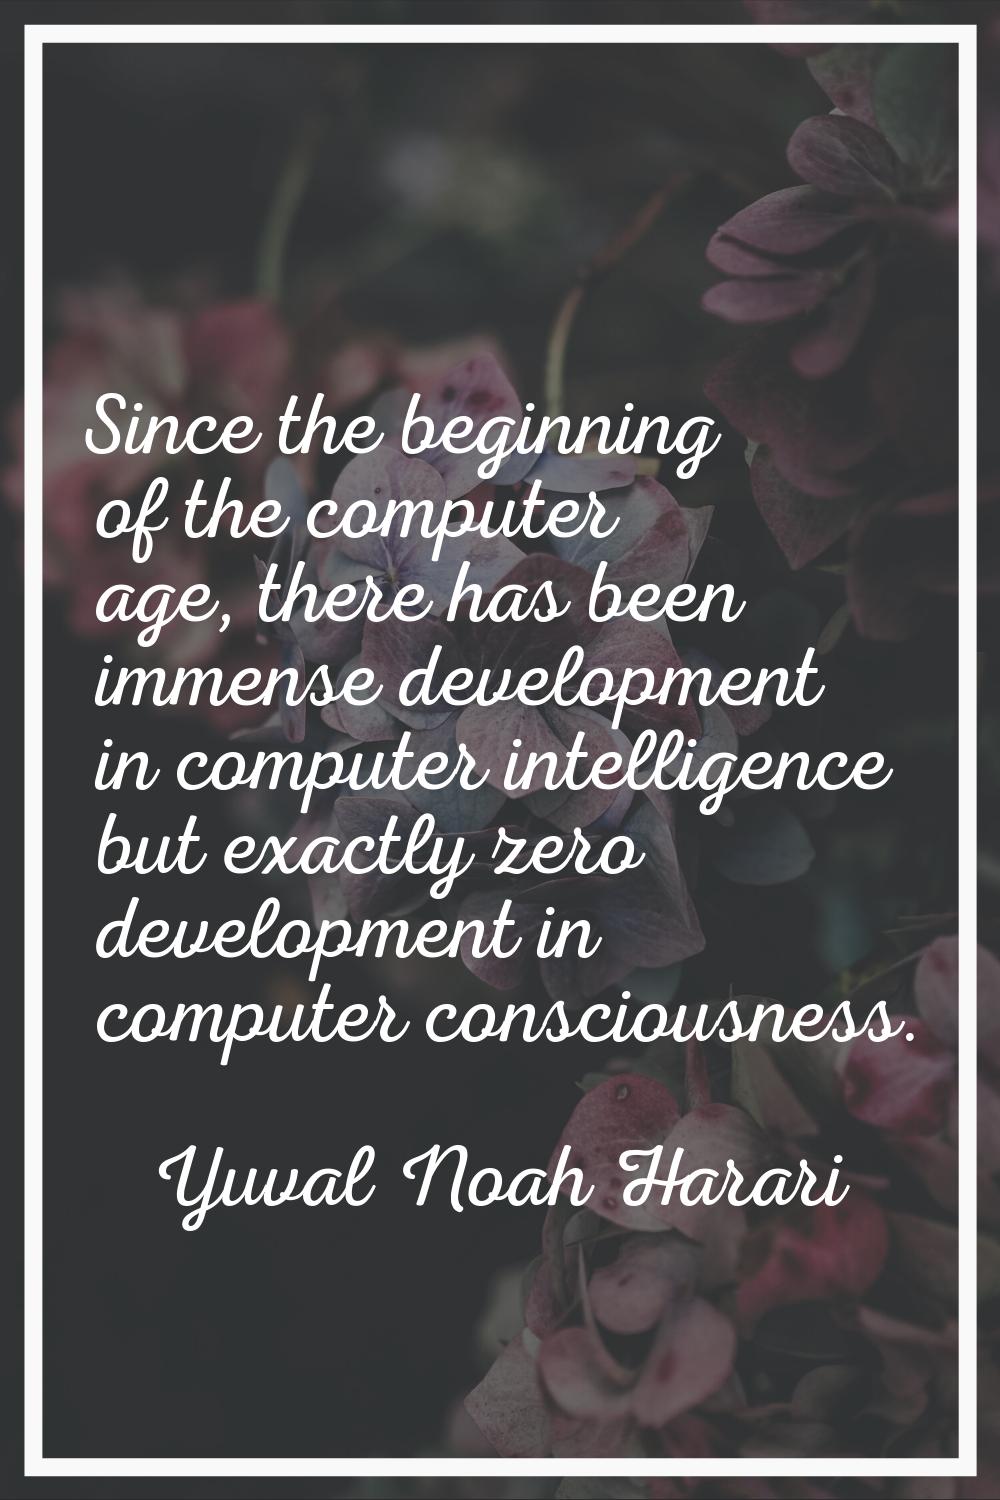 Since the beginning of the computer age, there has been immense development in computer intelligenc